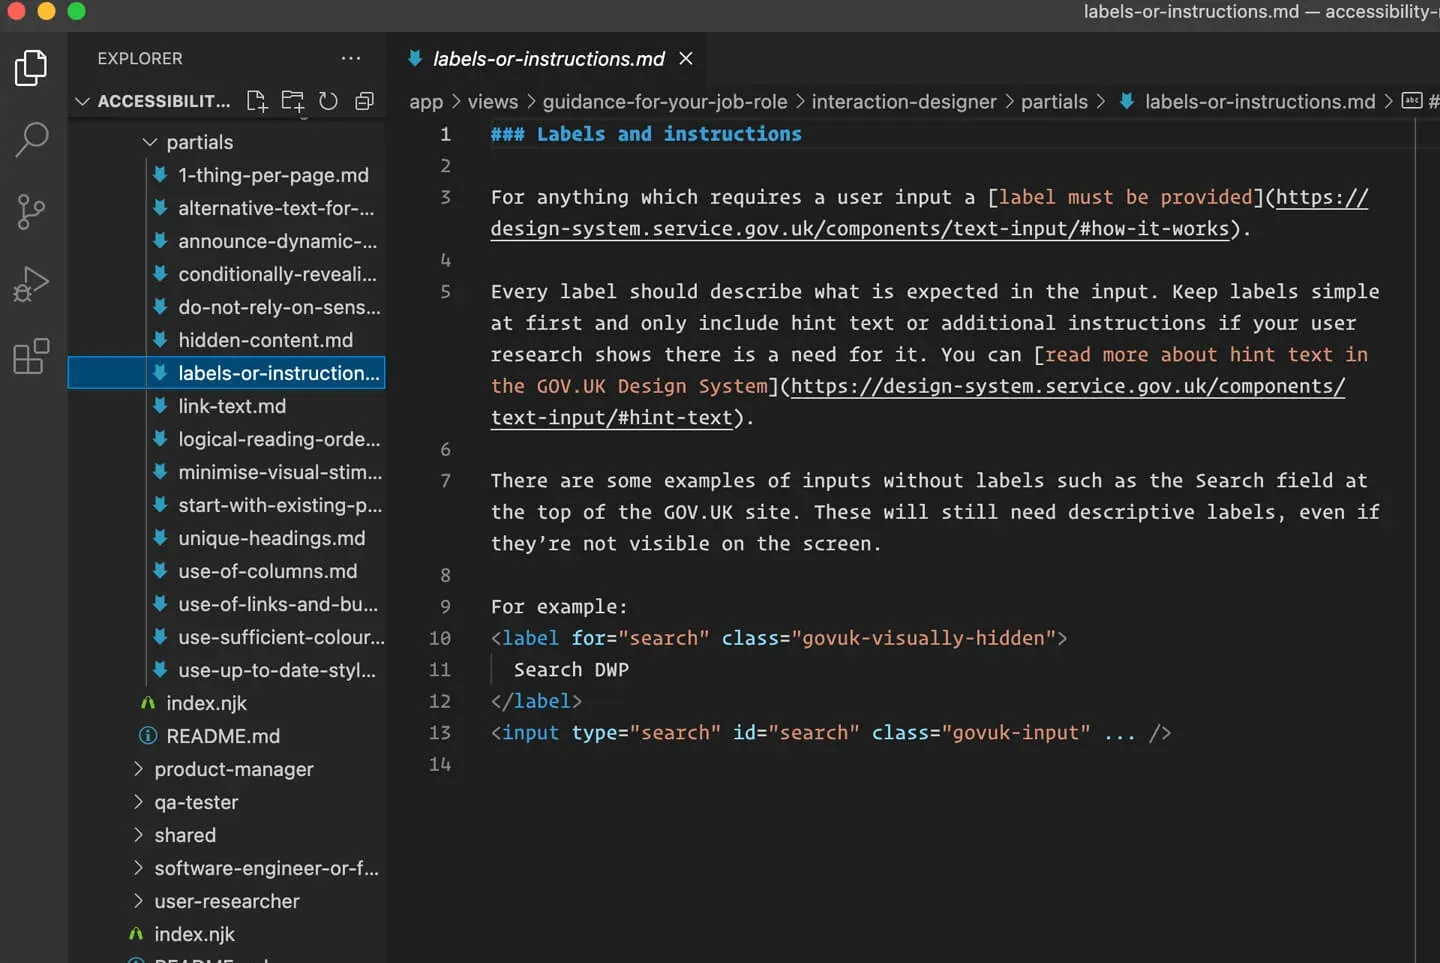 The Accessibility Manual open in Visual Studio Code. It shows the content to explain labels or instructions to an Interaction Designer, but it is written in Markdown format.